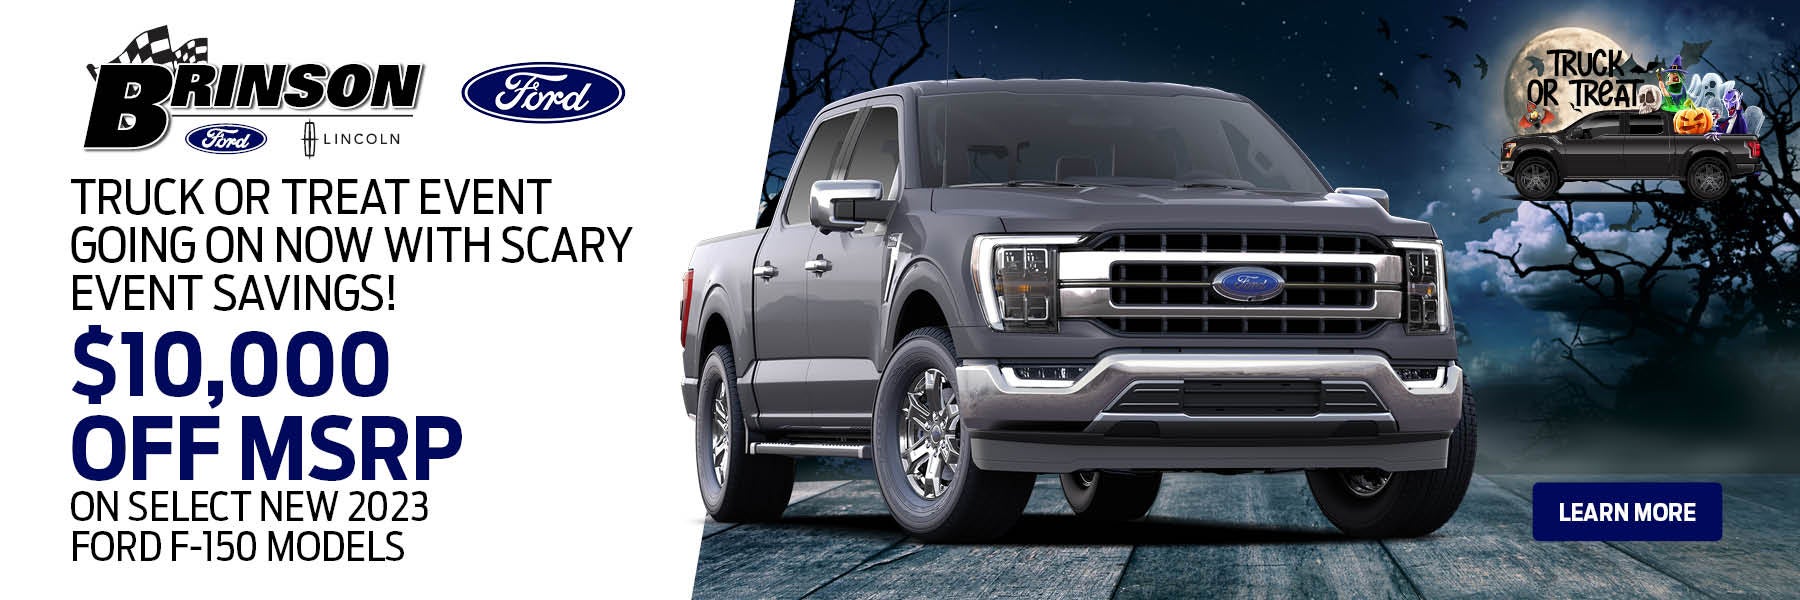 Ford F-150 Truck or Treat Event